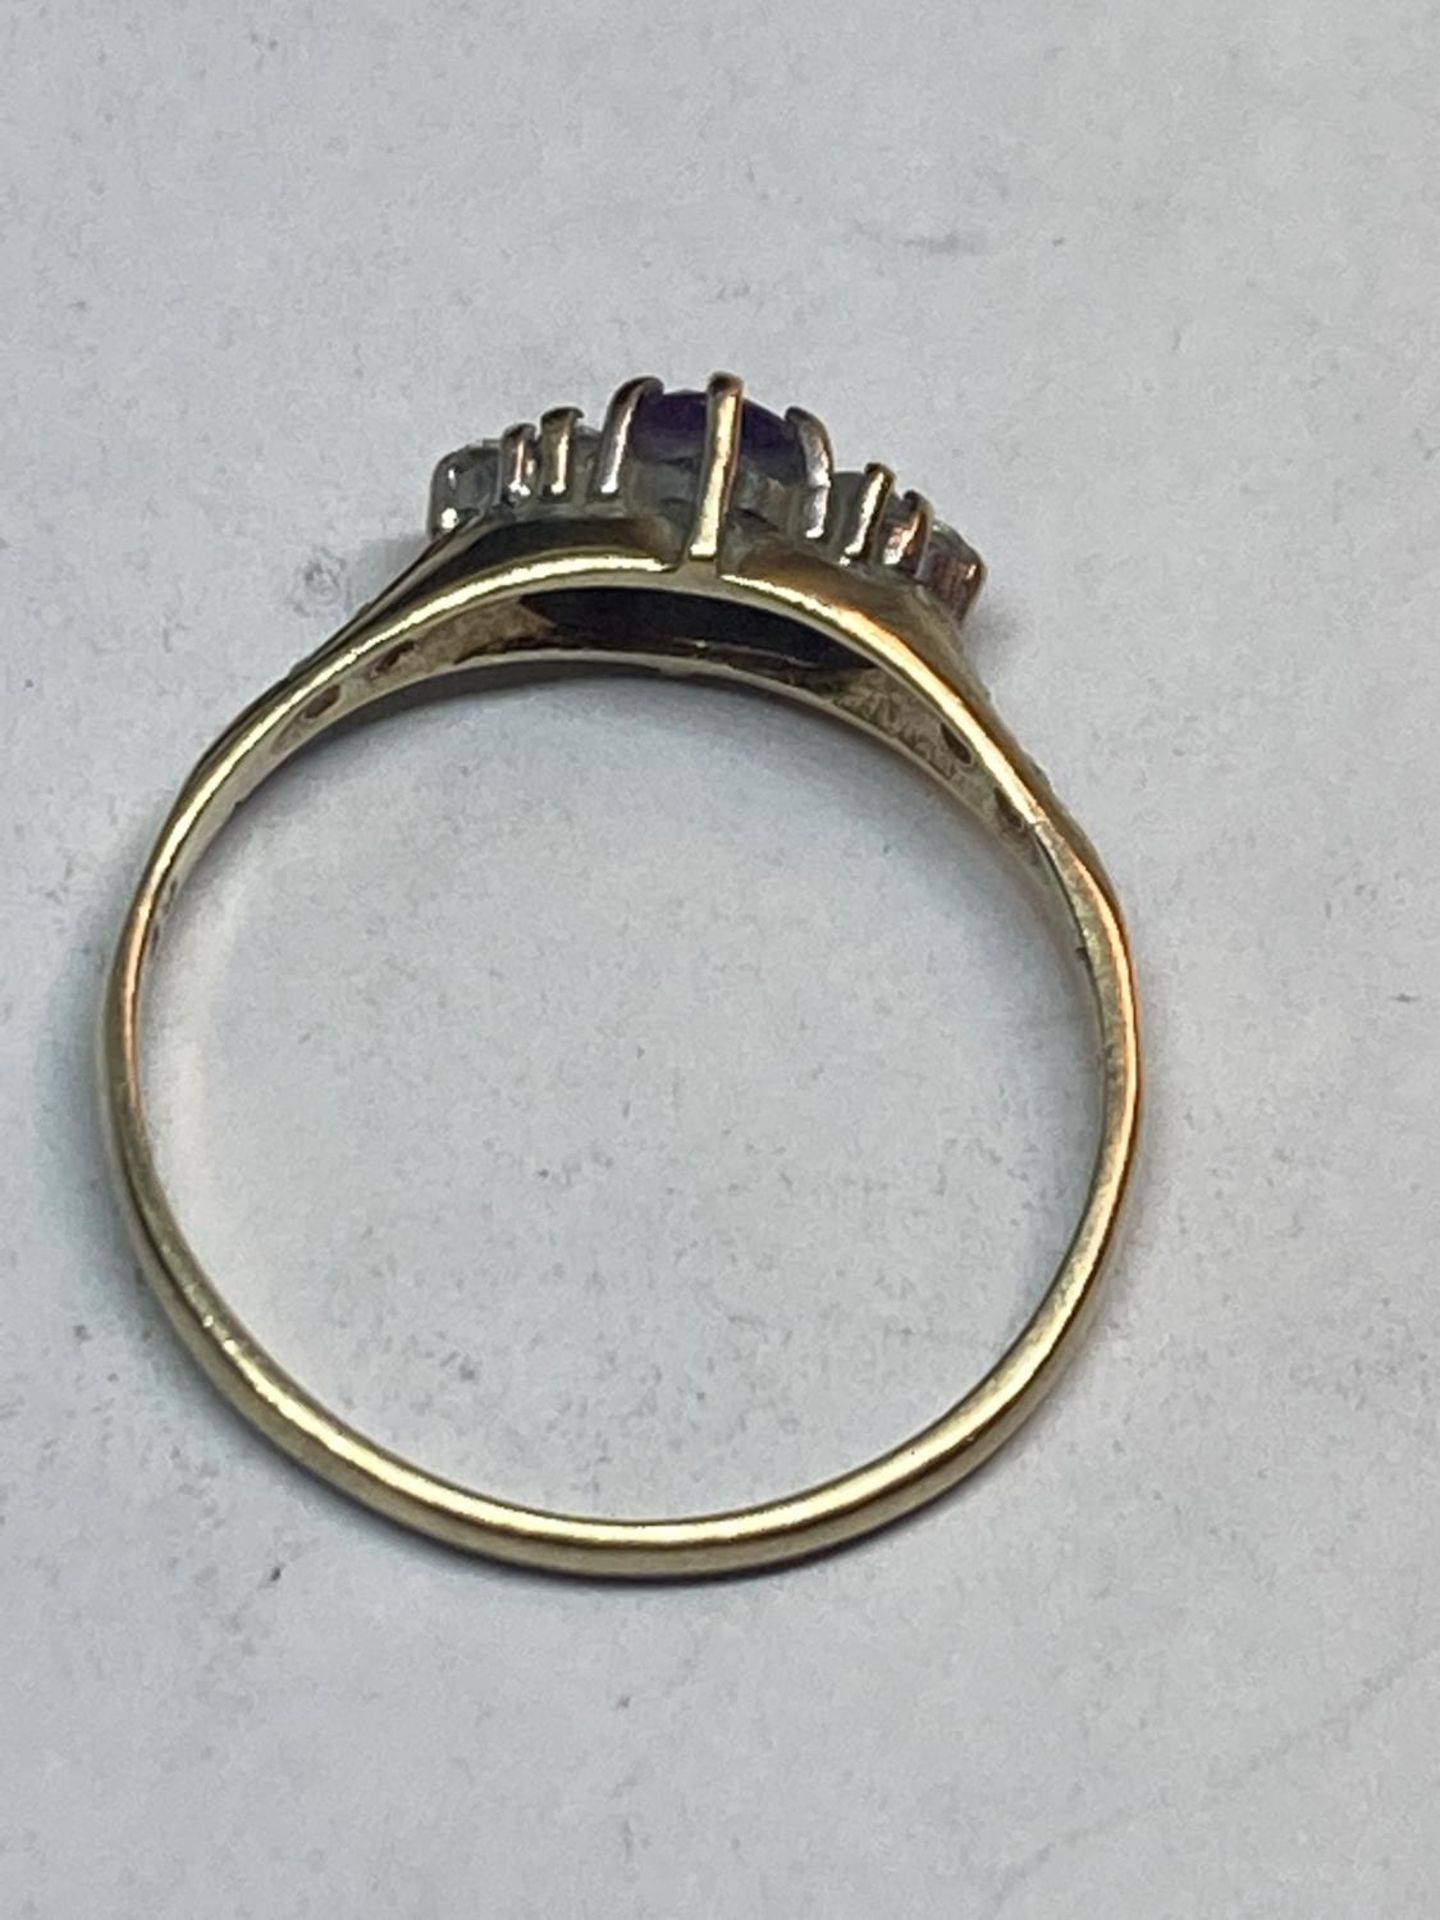 A 9 CARAT GOLD RING WITH A CENTRE AMETHYST SURROUNDED BY CUBIC ZIRCONIAS SIZE Q/R - Image 3 of 4